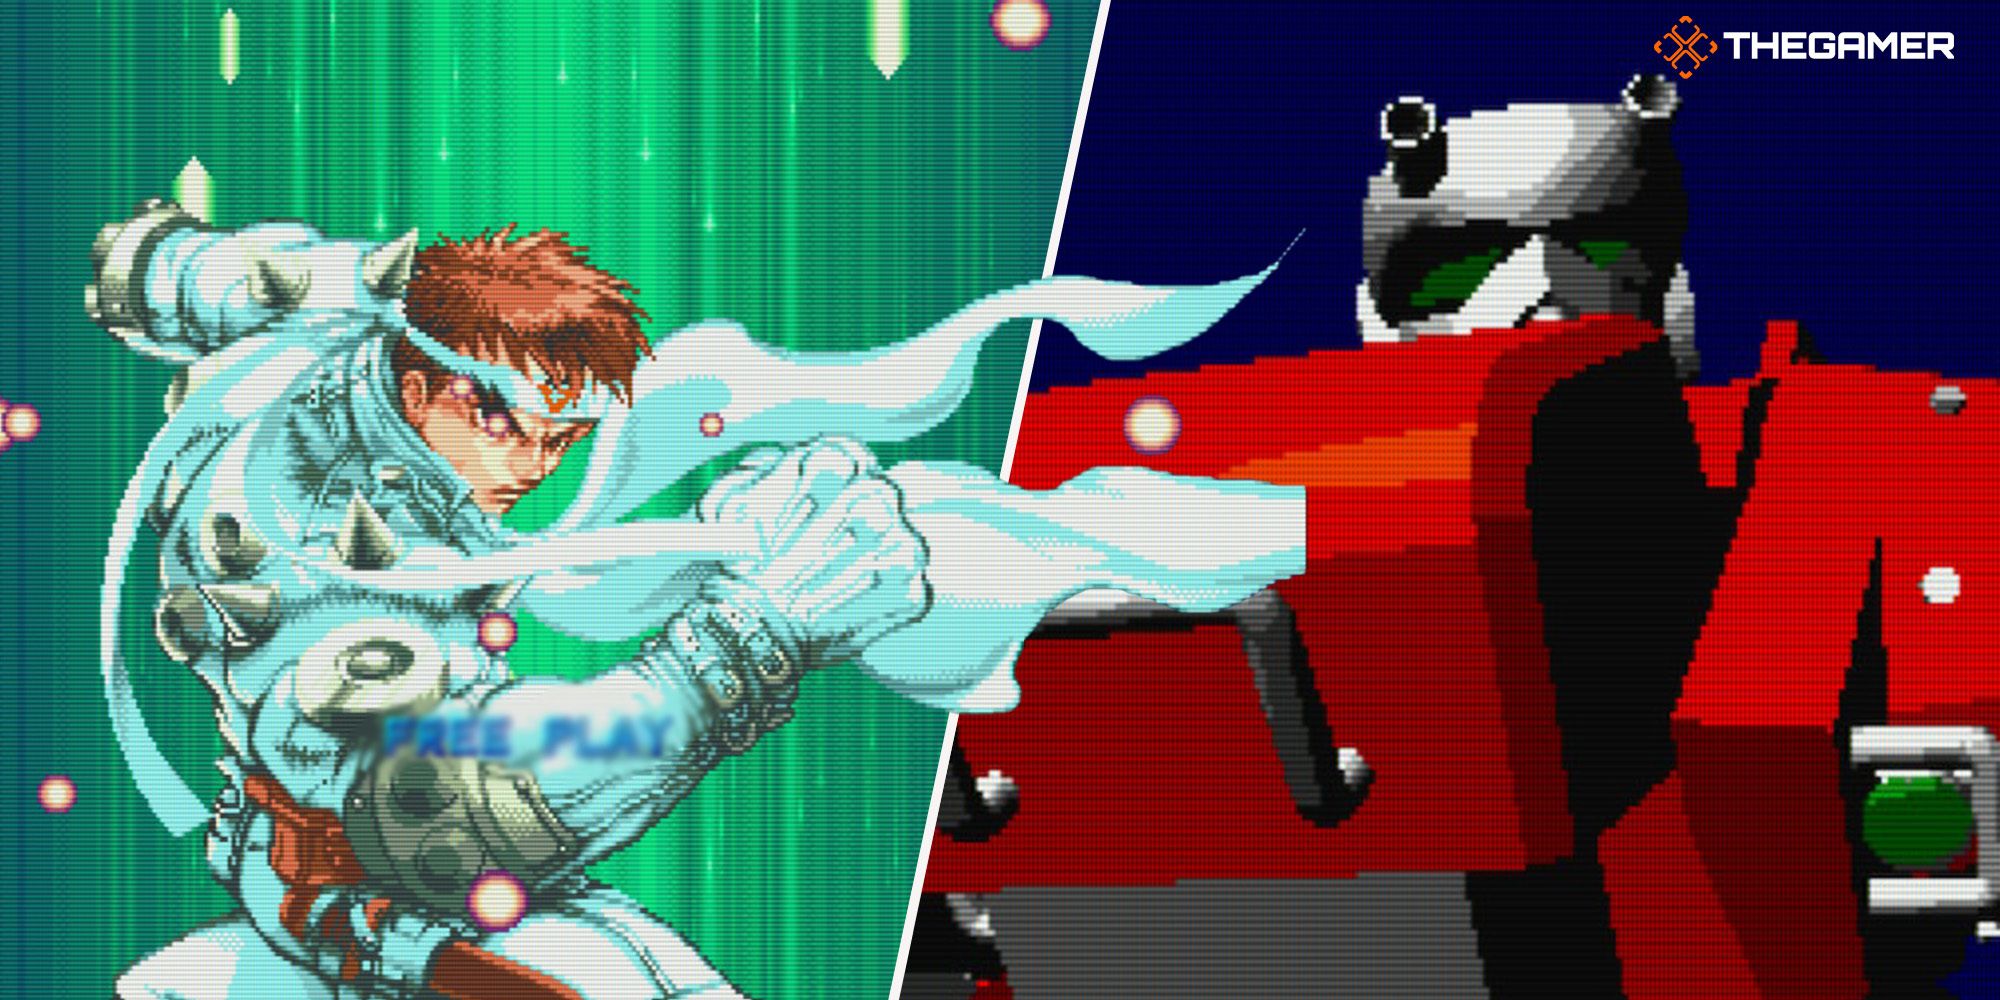 [Panel 1] Jin poses against a field of green energy. [Panel 2] Blodia, a red mech fighter, boots up. Images from Cyberbots on Capcom Fighting Collection.